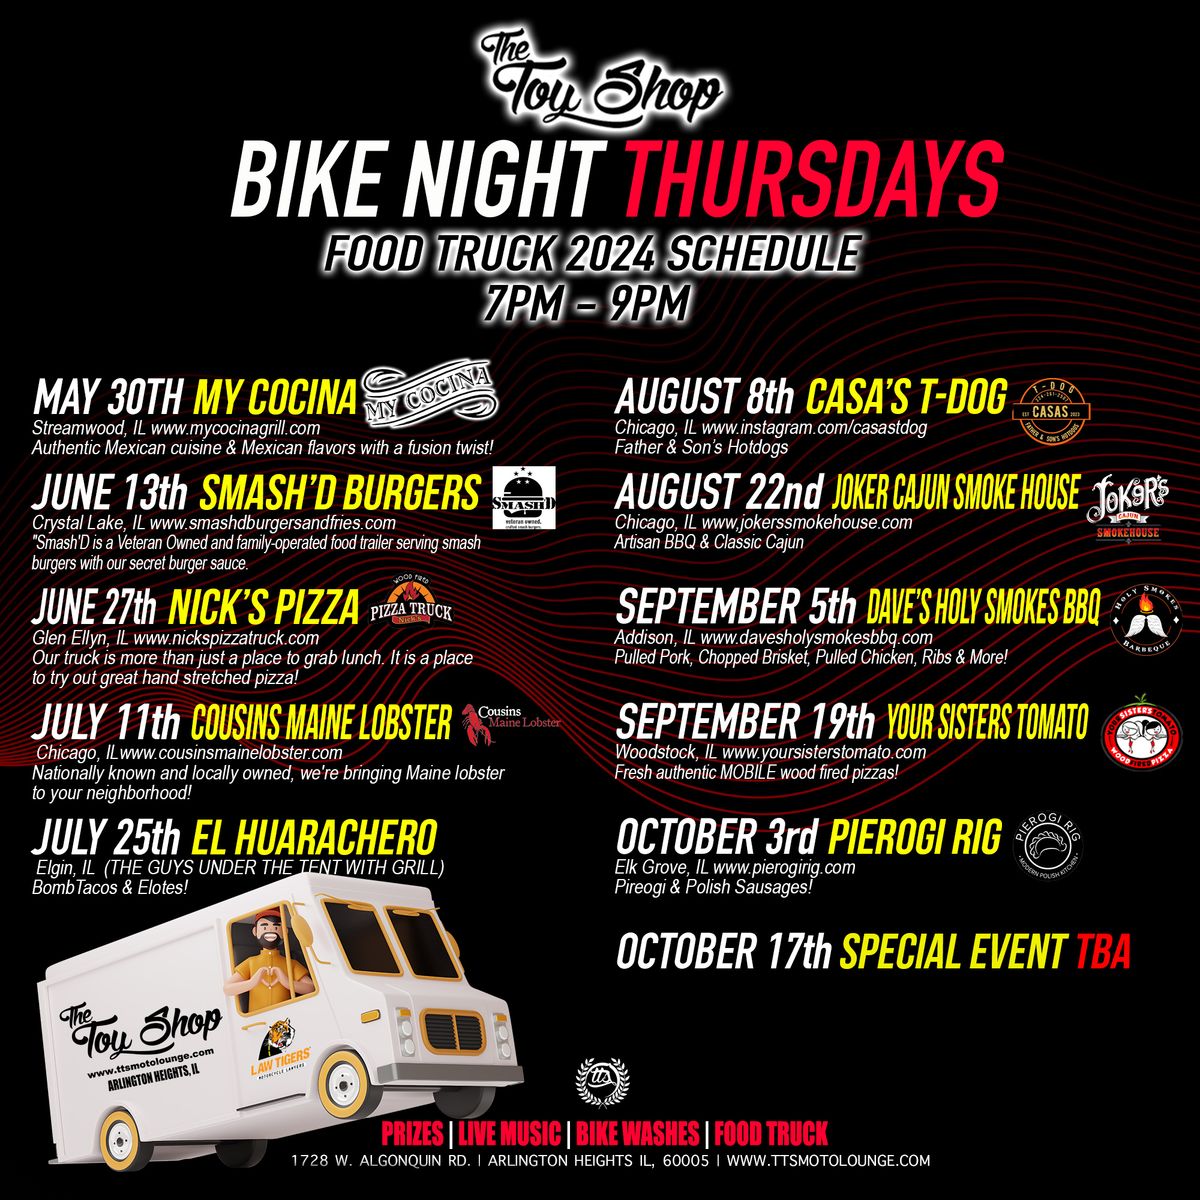 Bike Night Thursdays Round 9 with Your Sisters Tomato September 19th 